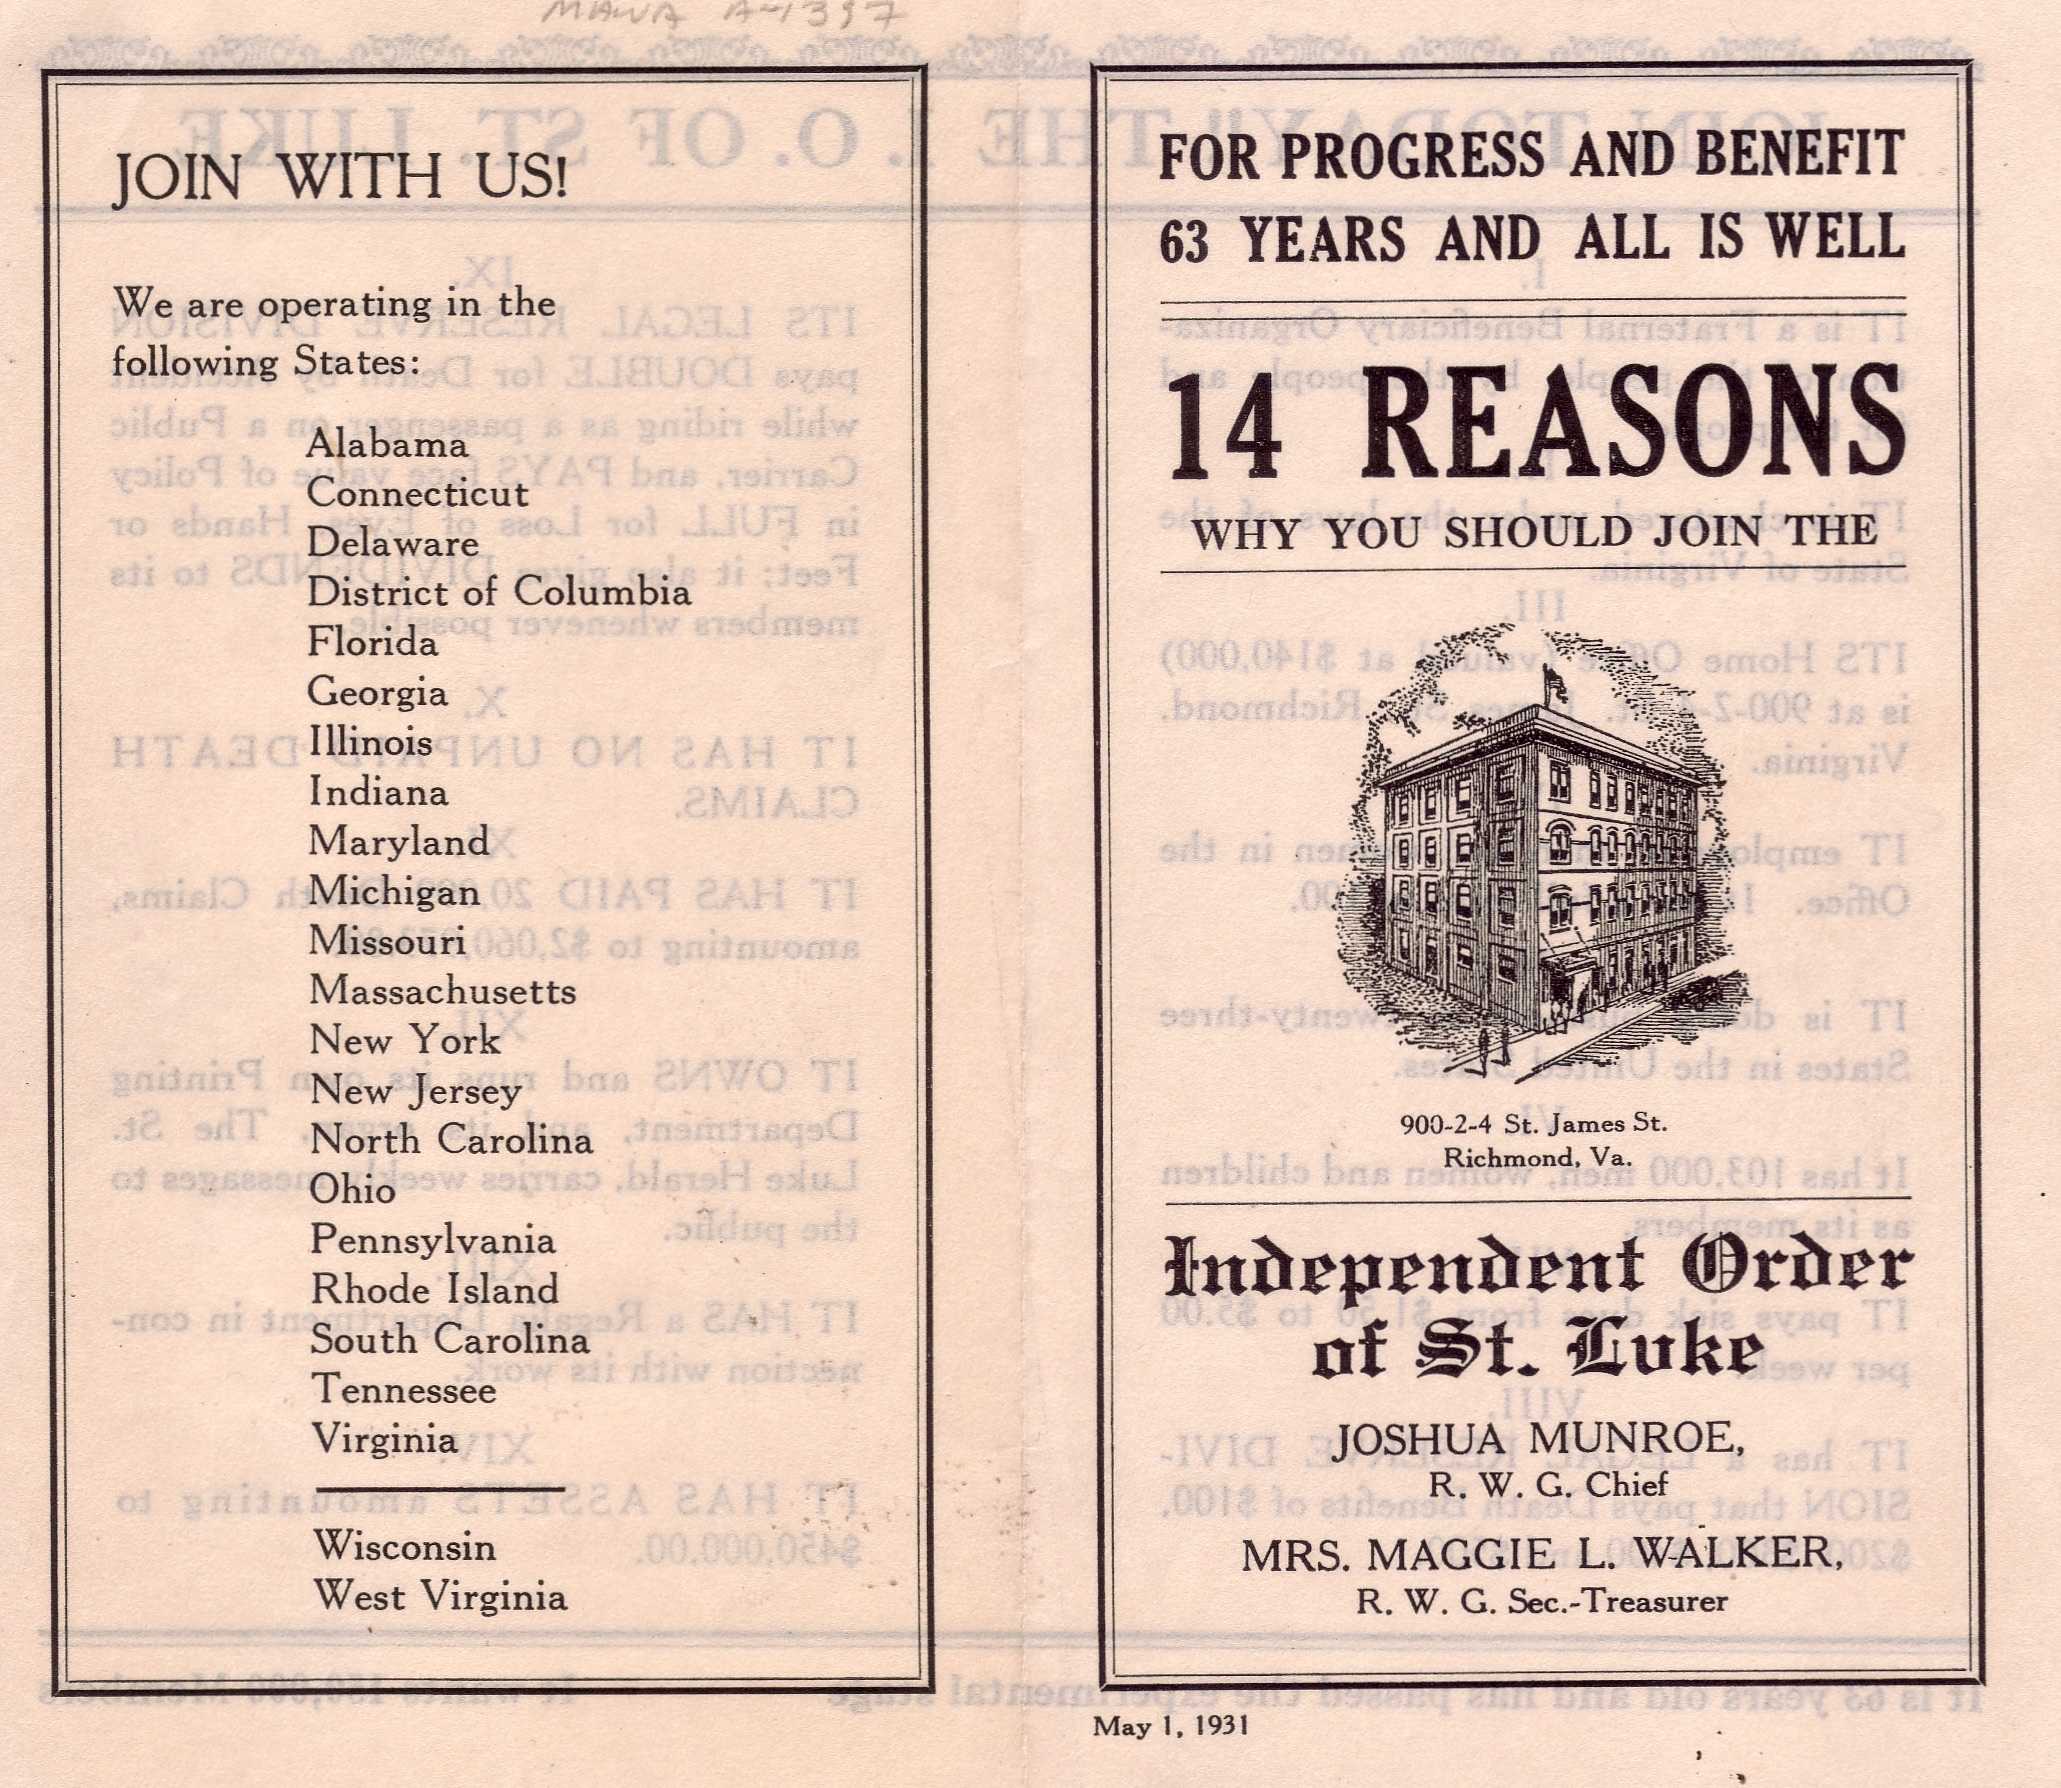 Recruitment brochure from Independent Order of St Luke